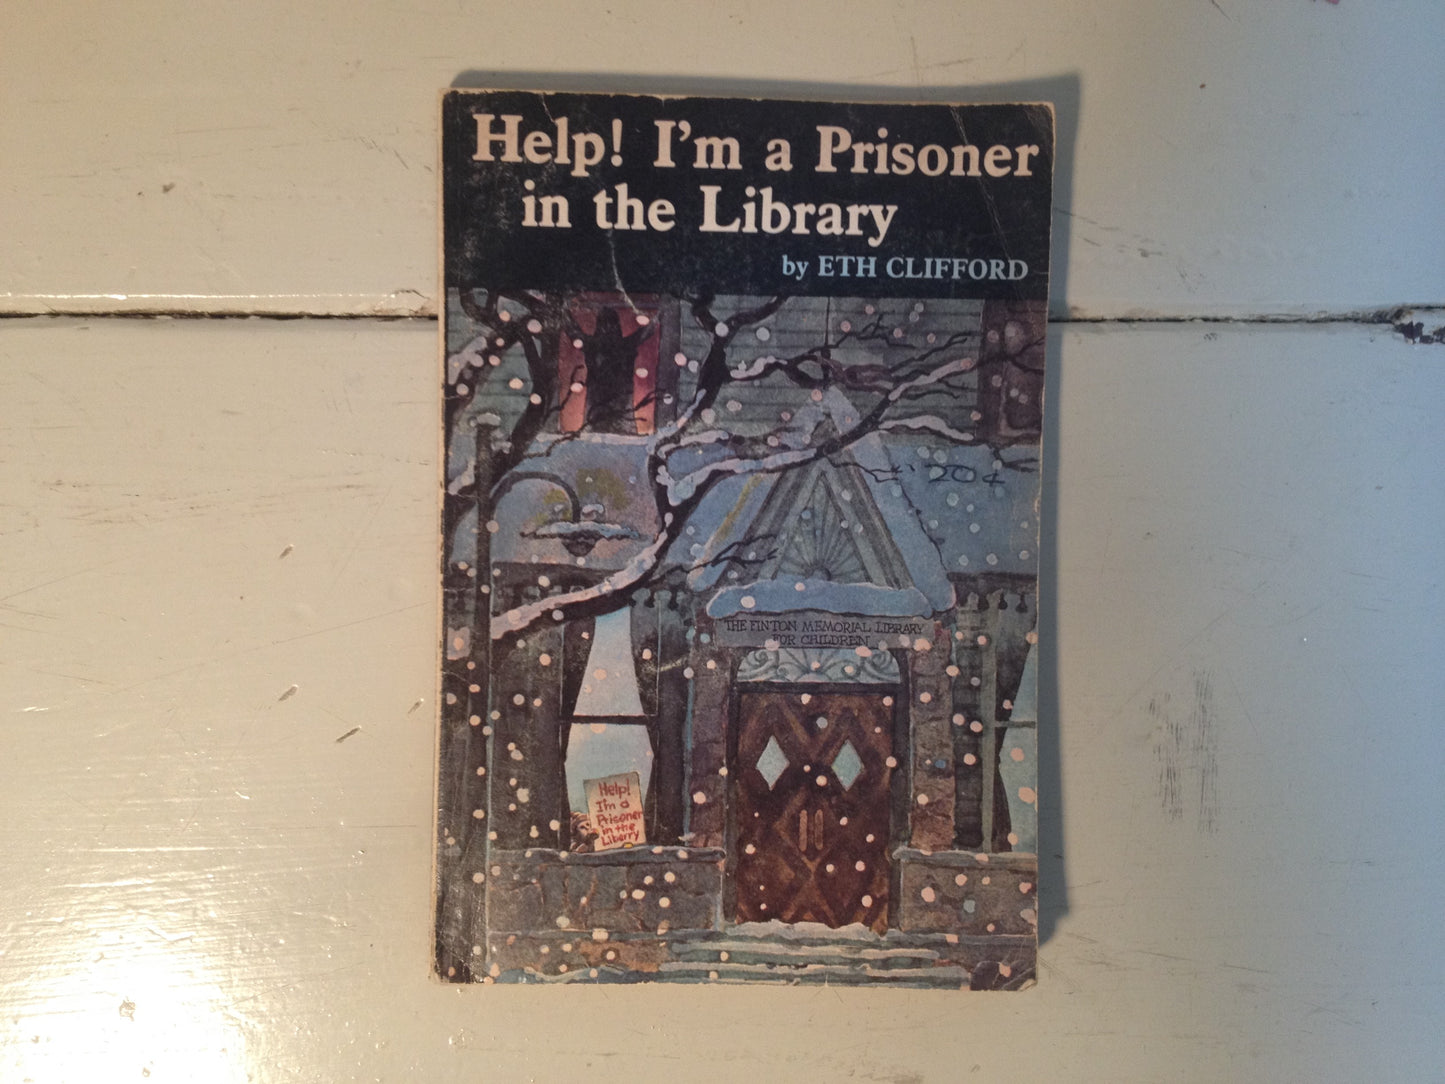 Help! I'm a Prisoner in the Library by Eth Clifford